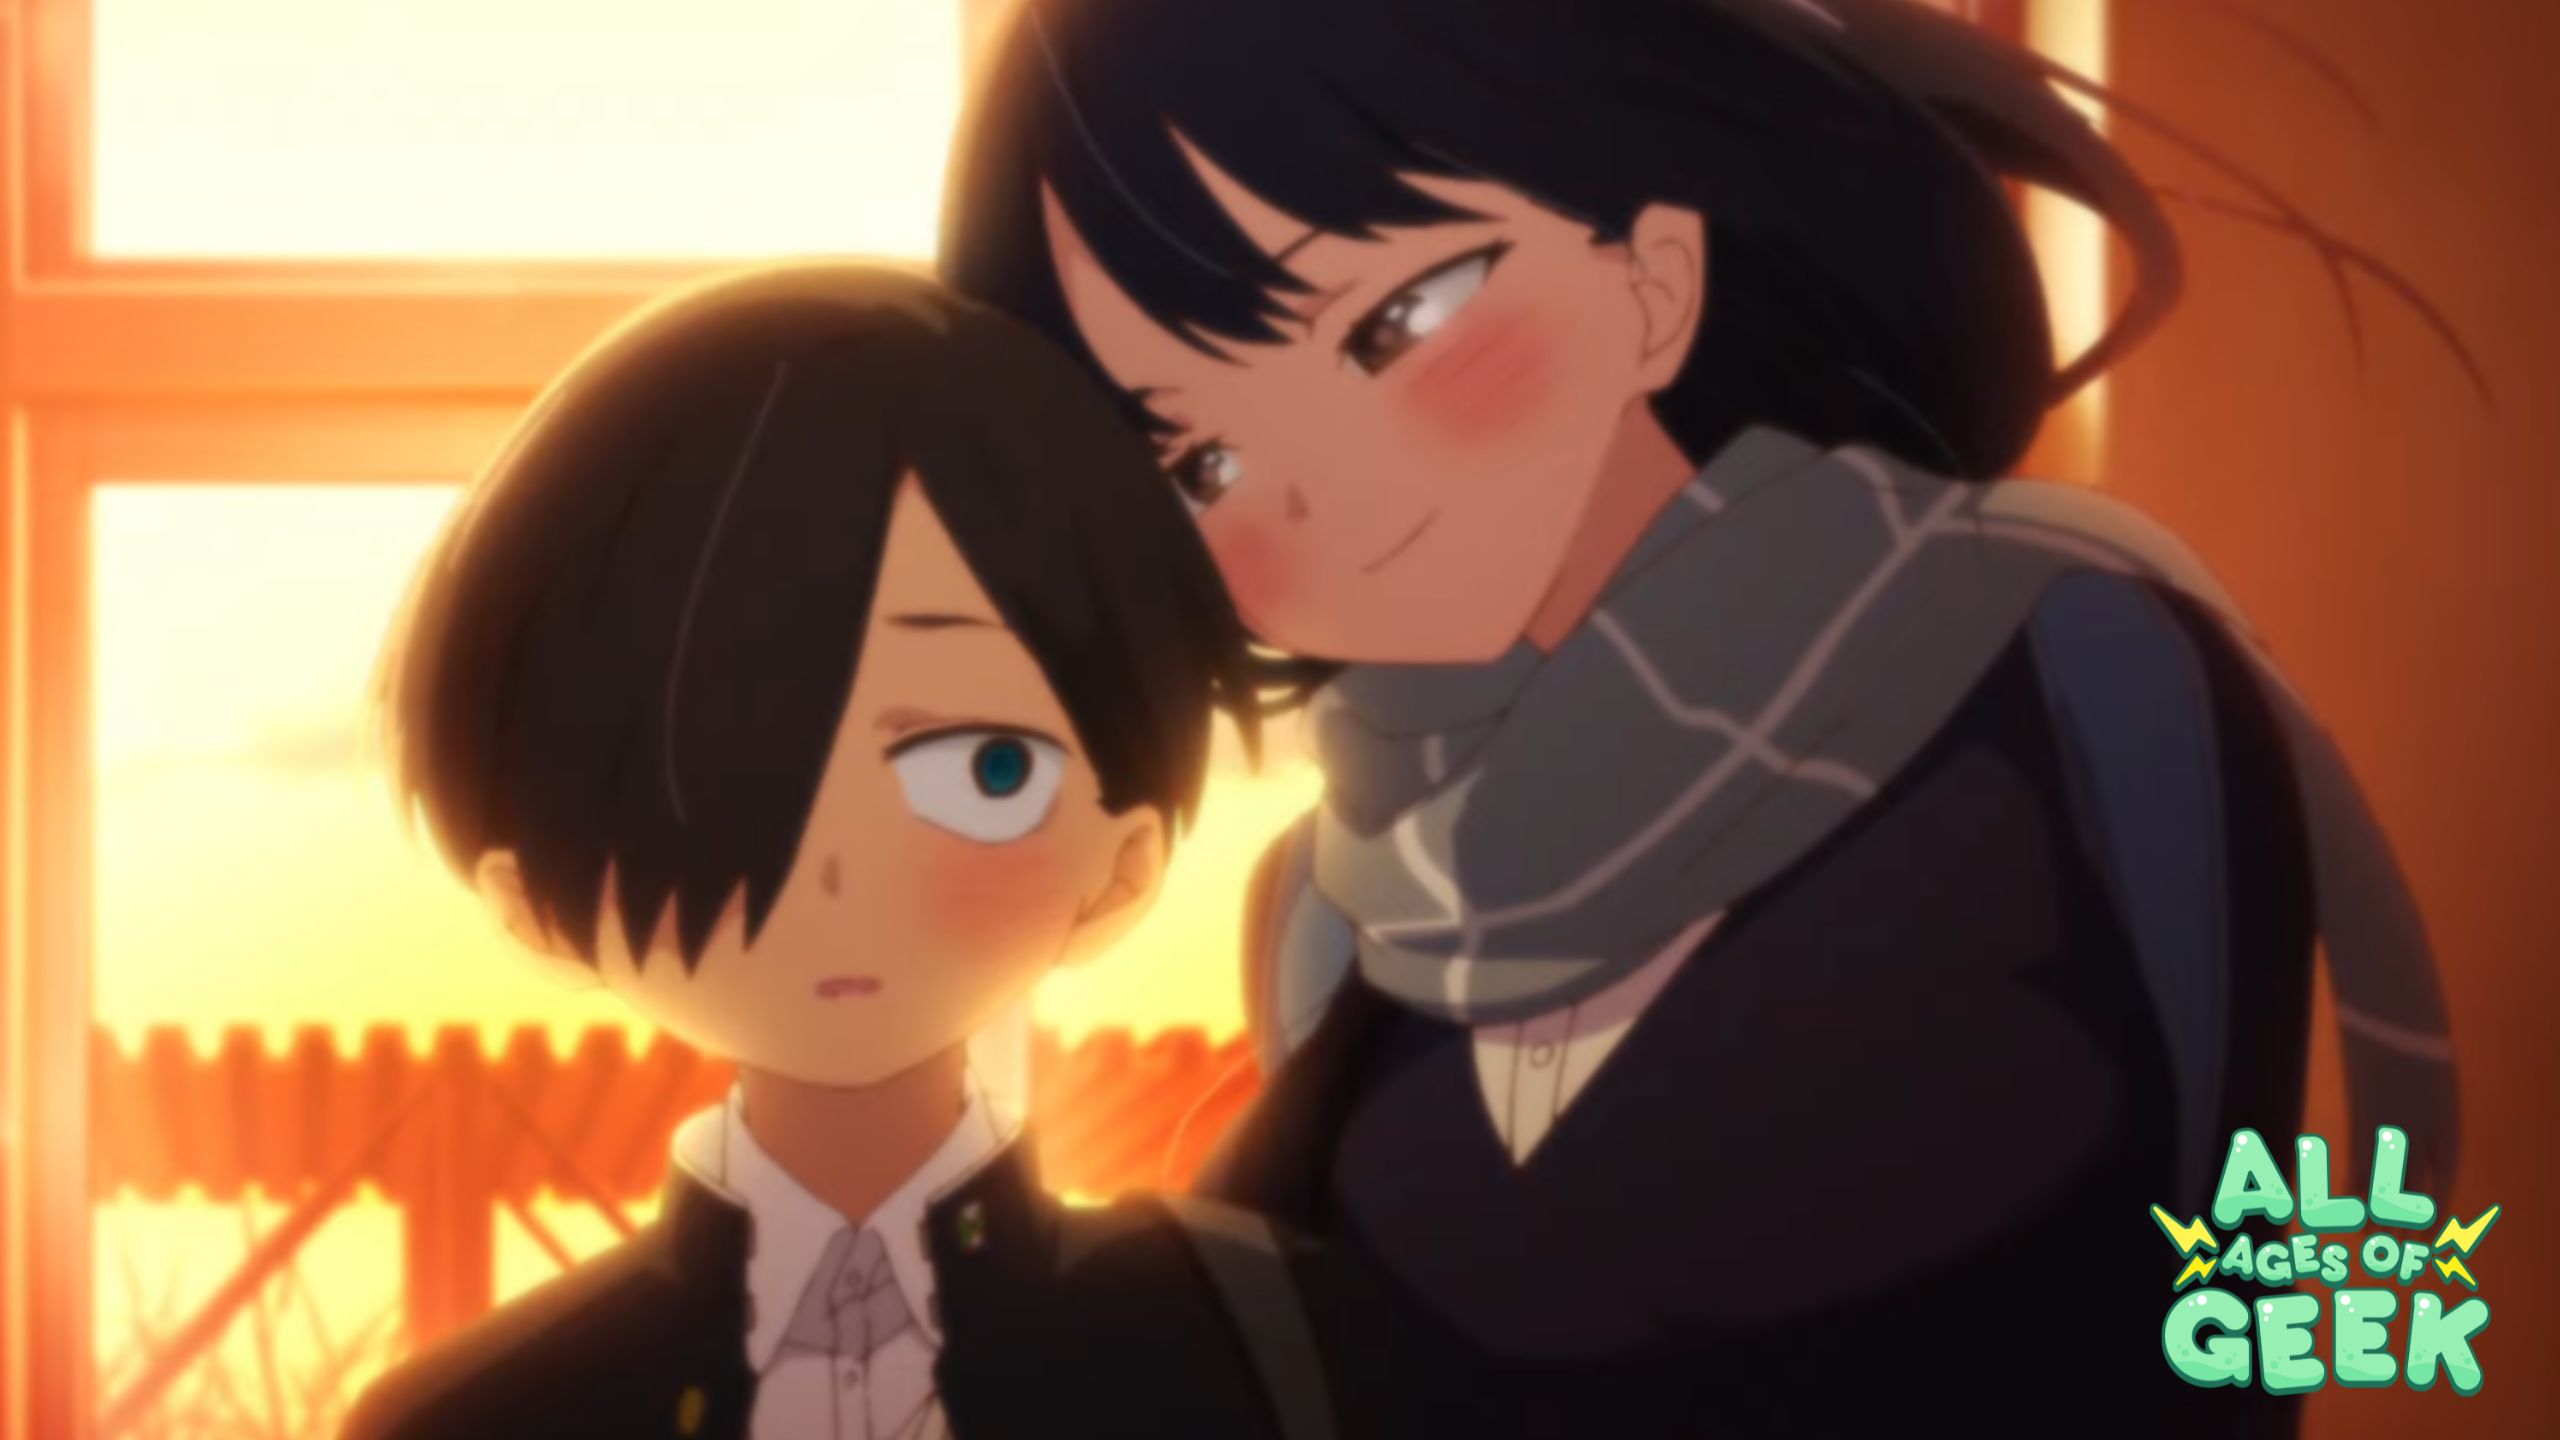 An image from the anime "The Dangers in My Heart Season 2," featuring two characters during a tender moment. The scene captures a boy in a school uniform with a surprised expression as a smiling girl with black hair hugs him from behind. Both are highlighted against the warm glow of a setting sun that filters through a window, adding to the gentle atmosphere of the scene. The "ALL AGES OF GEEK" logo is prominently displayed in the lower right corner, suggesting this is promotional content for the series associated with their brand.